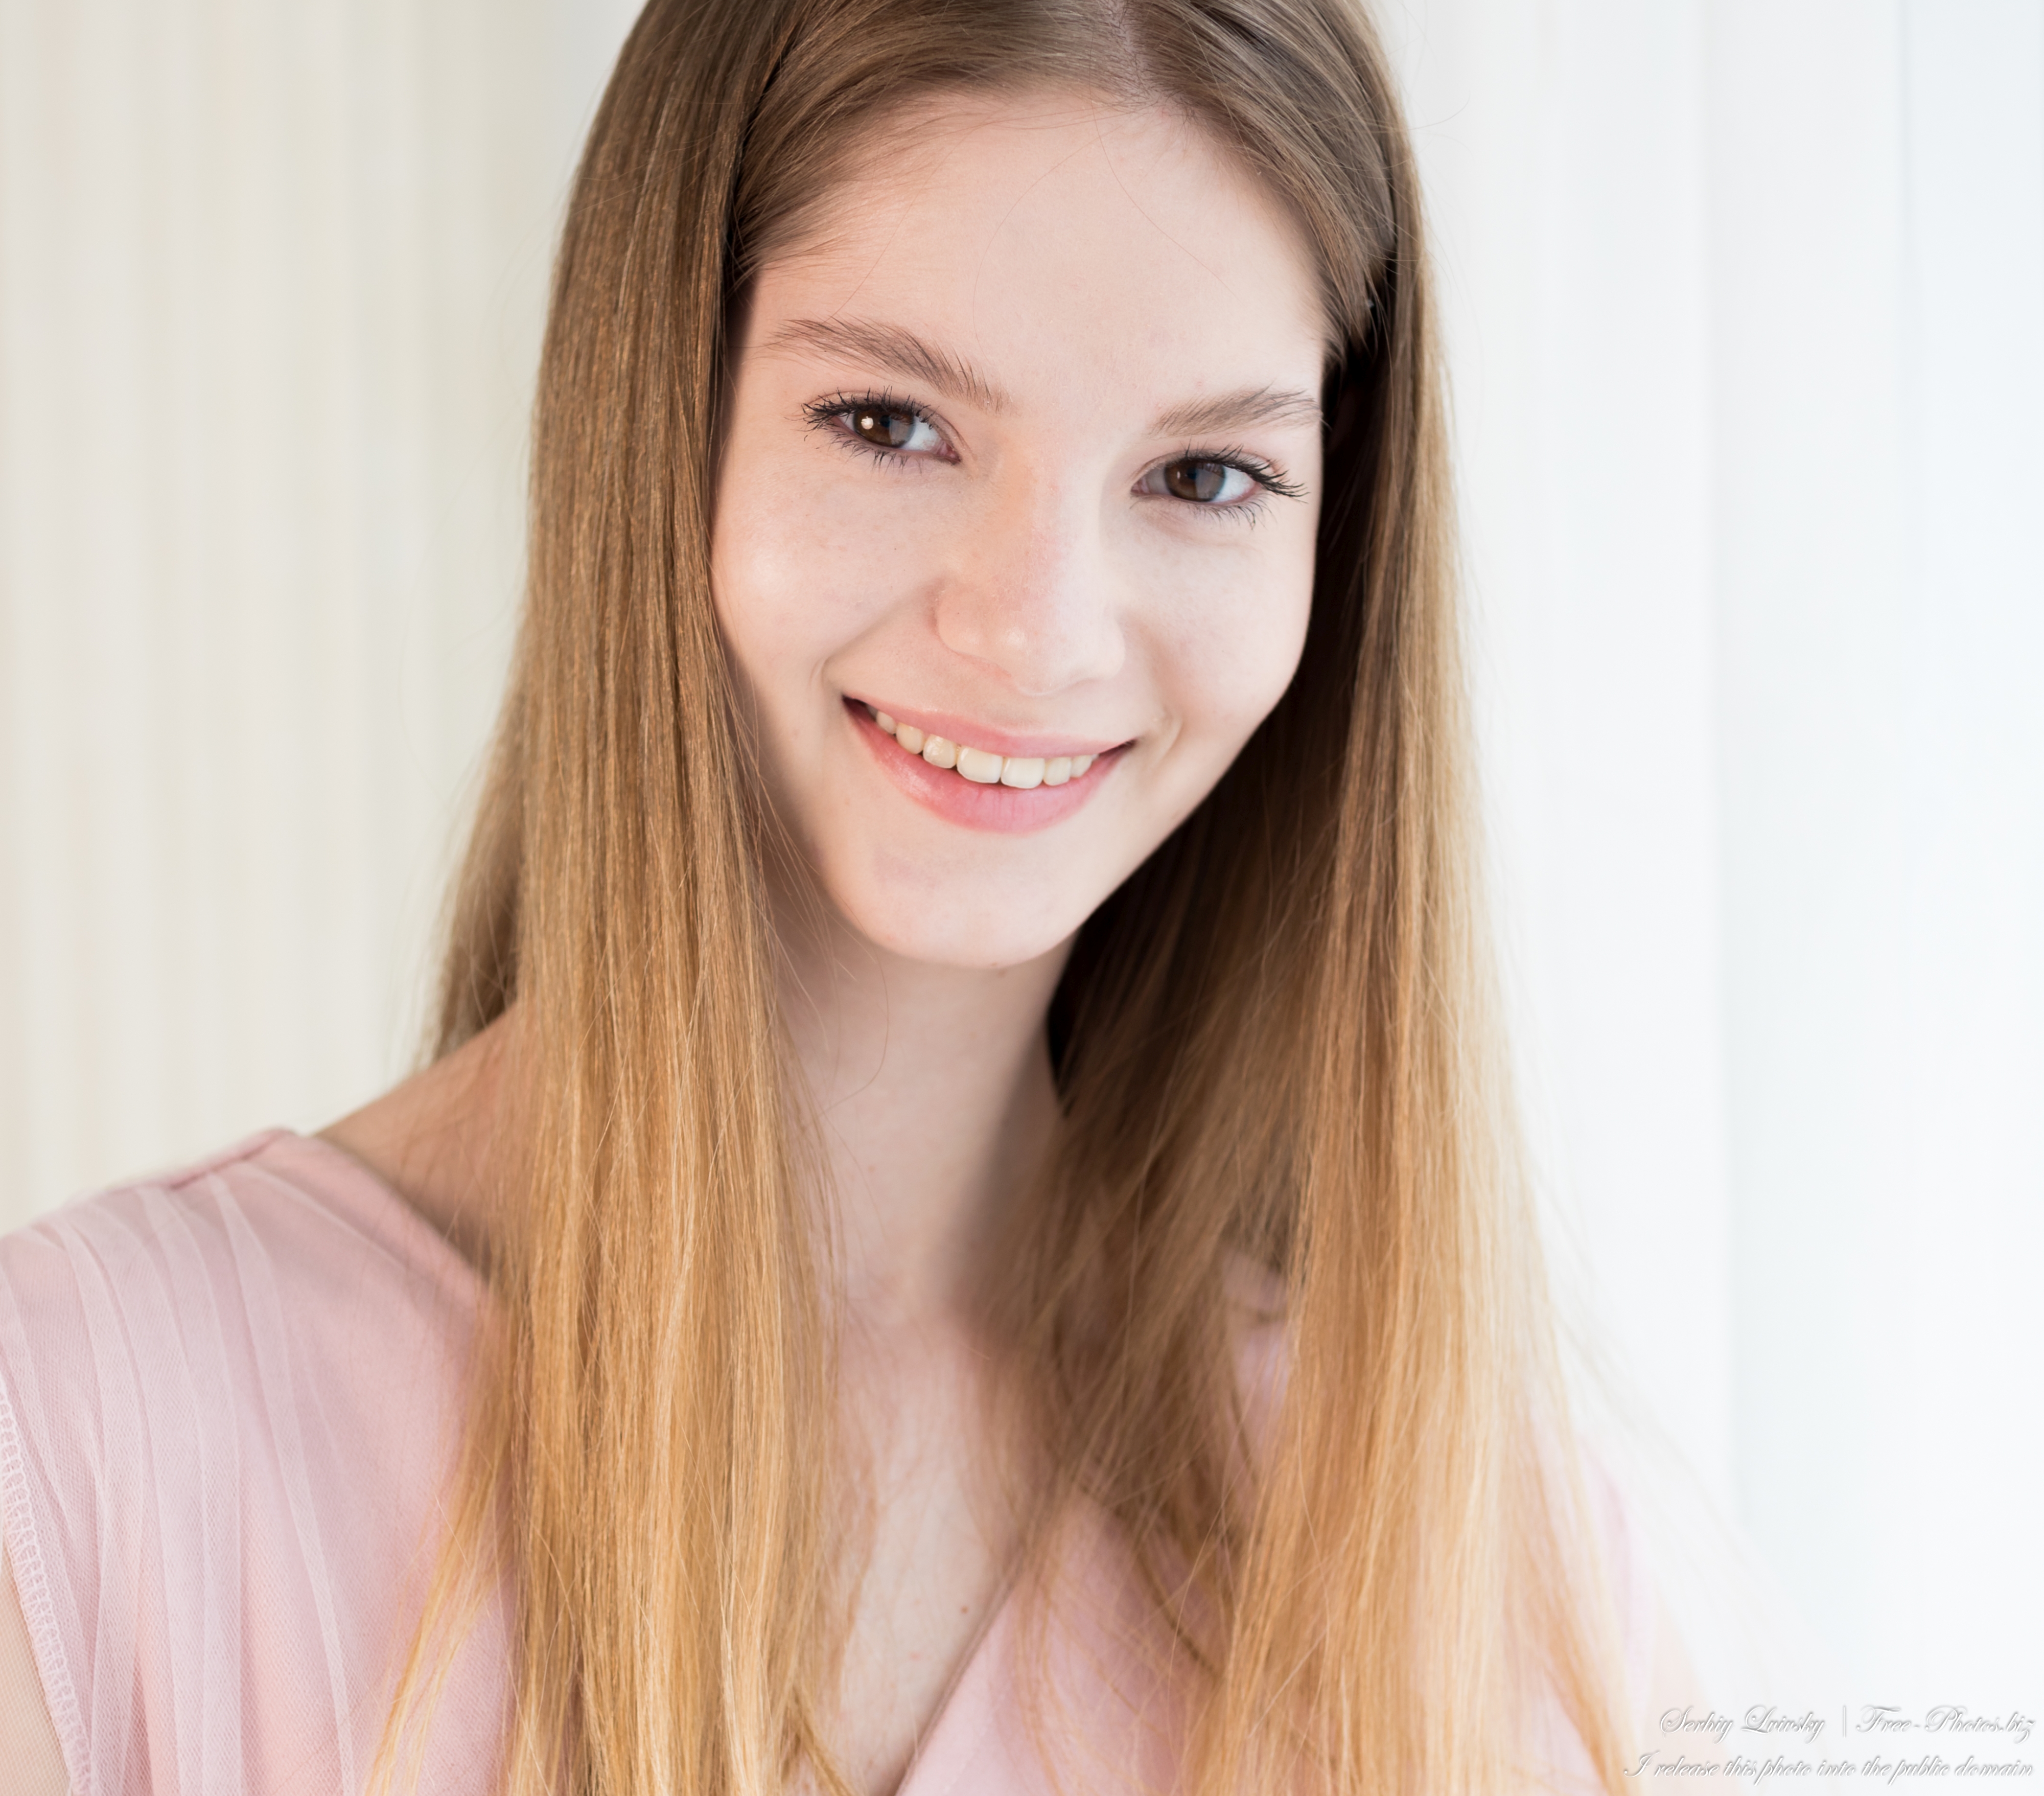 vika_an_18-year-old_girl_with_natural_fair_hair_in_march_2023_by_serhiy_lvivsky_31